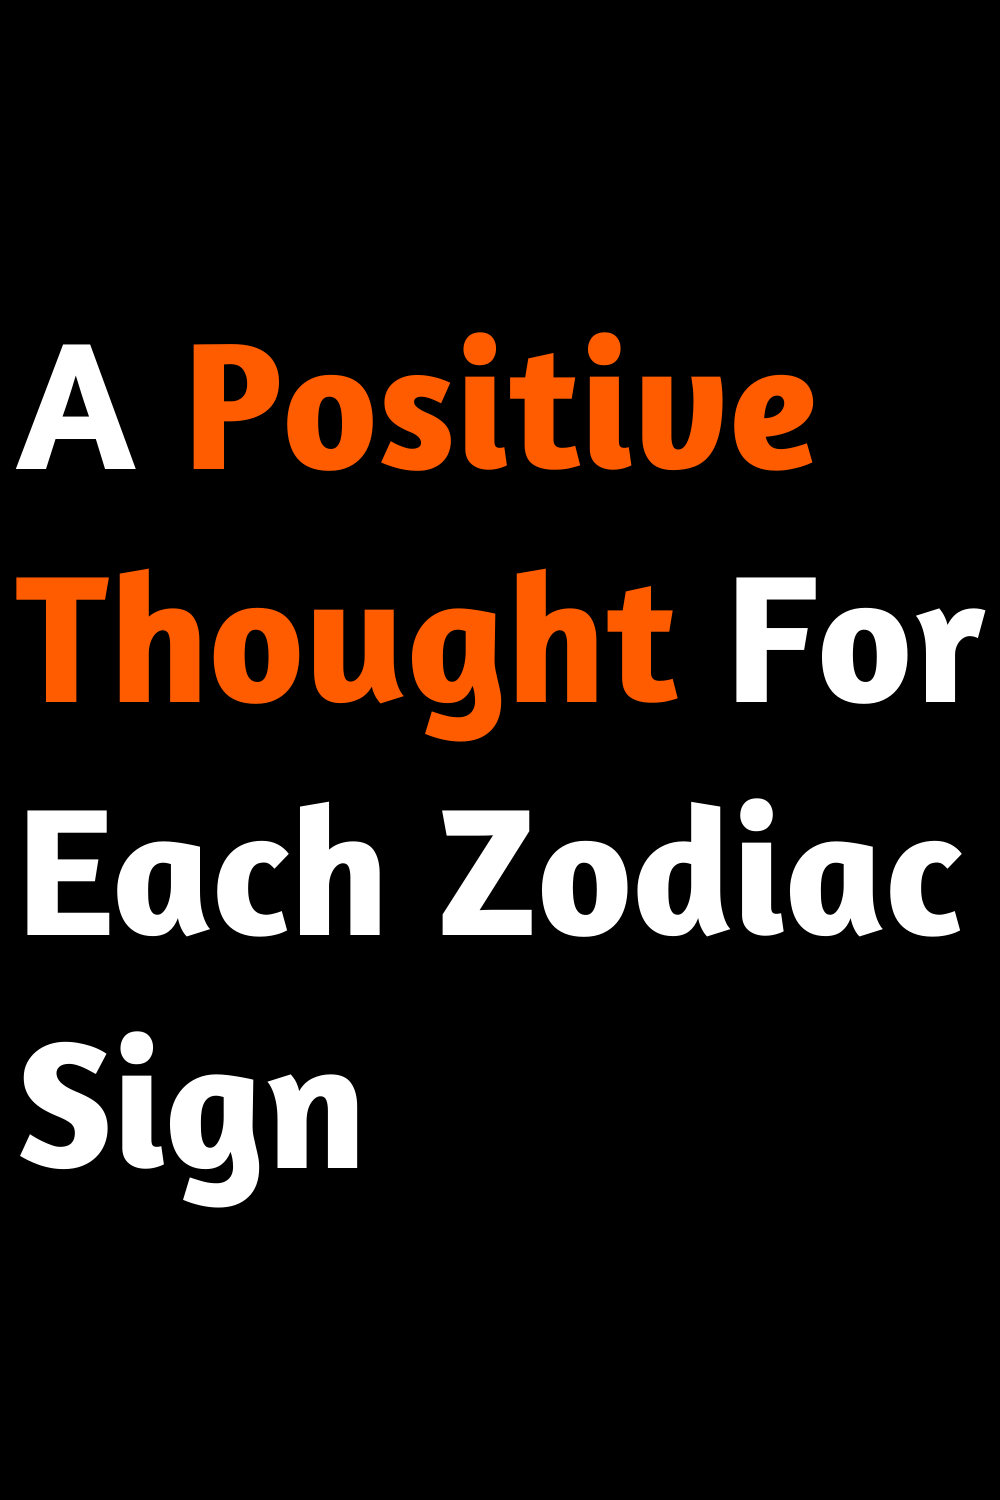 A Positive Thought For Each Zodiac Sign